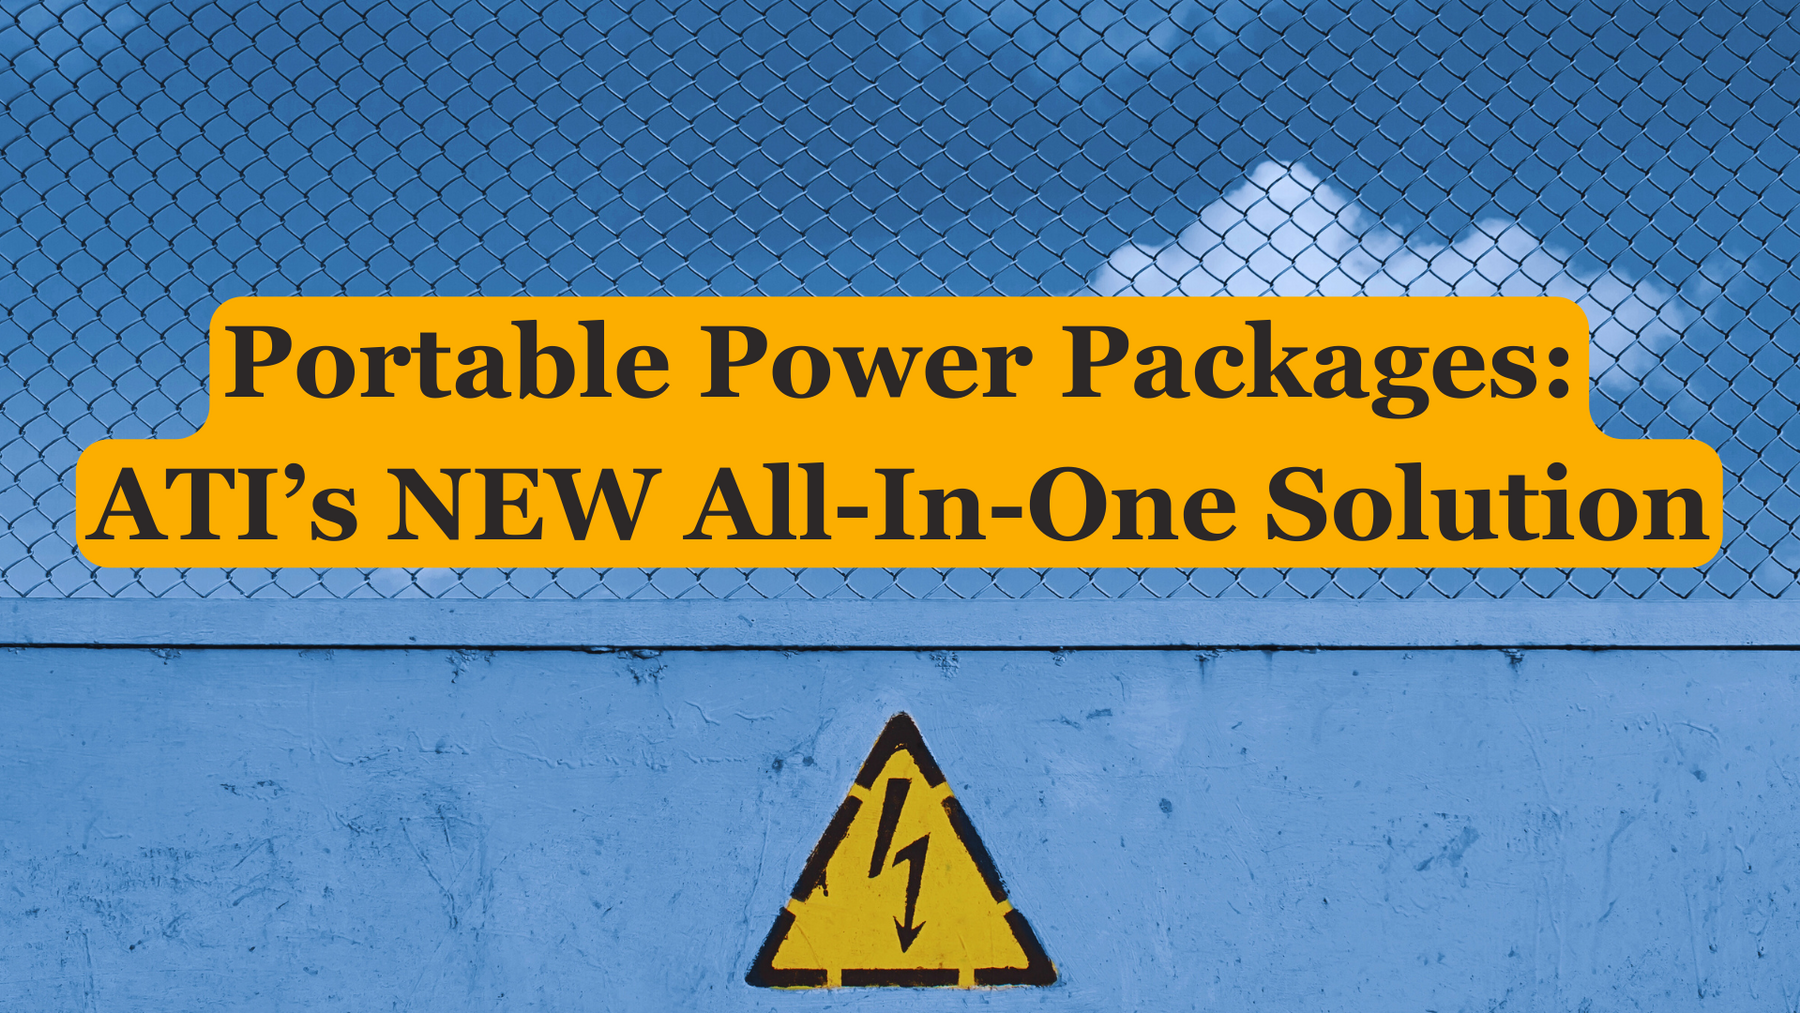 Portable Power Packages: ATI's NEW All-In-One Solution